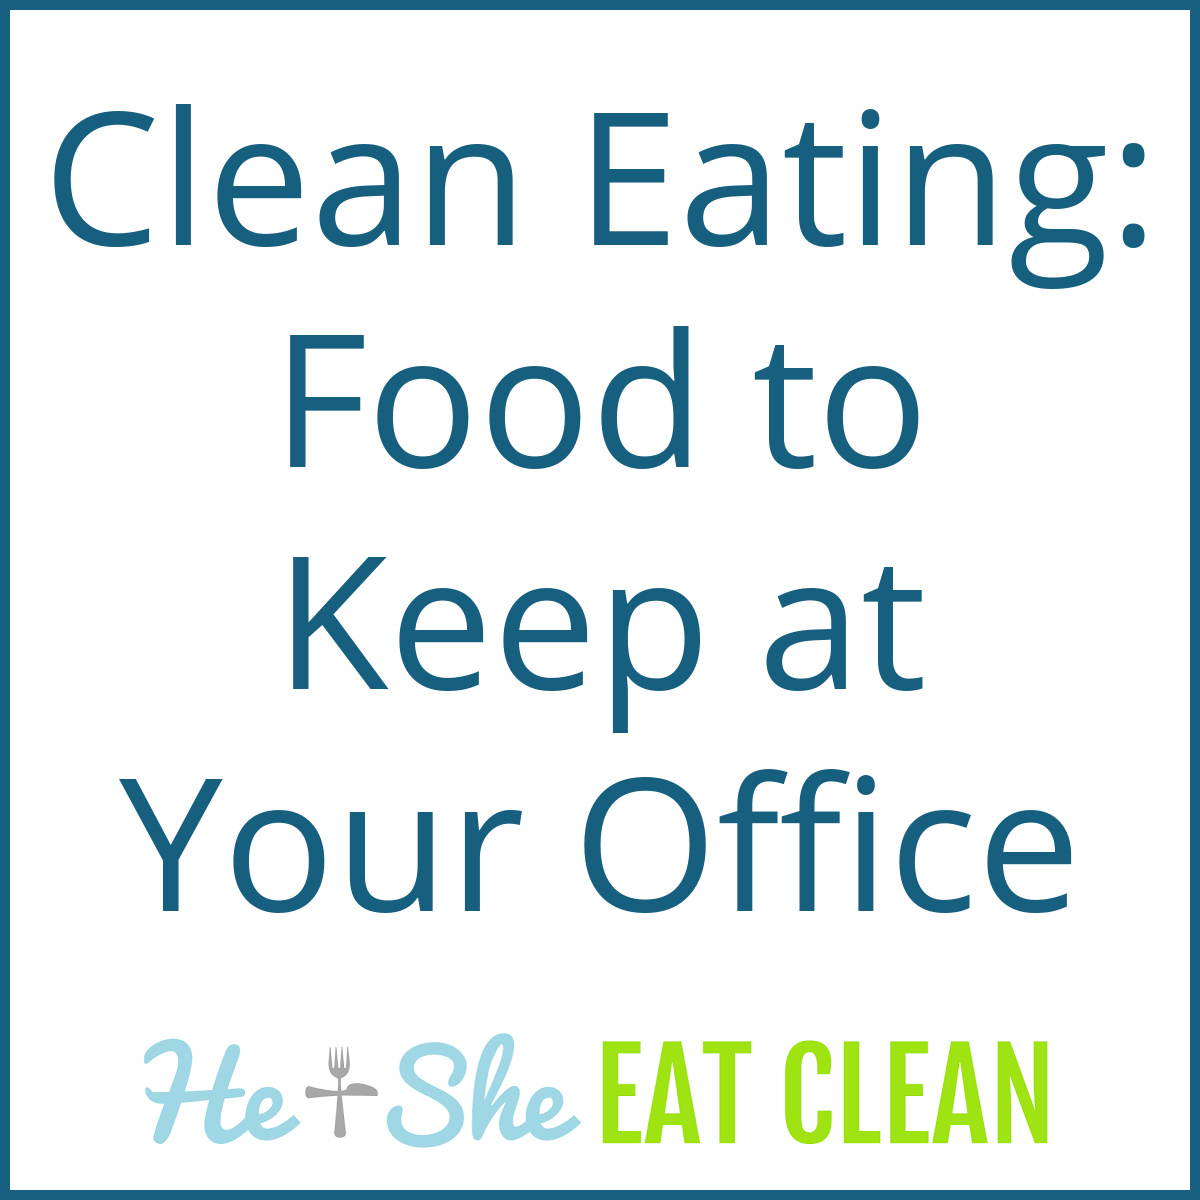 text reads Clean Eating: Food to Keep at Your Office